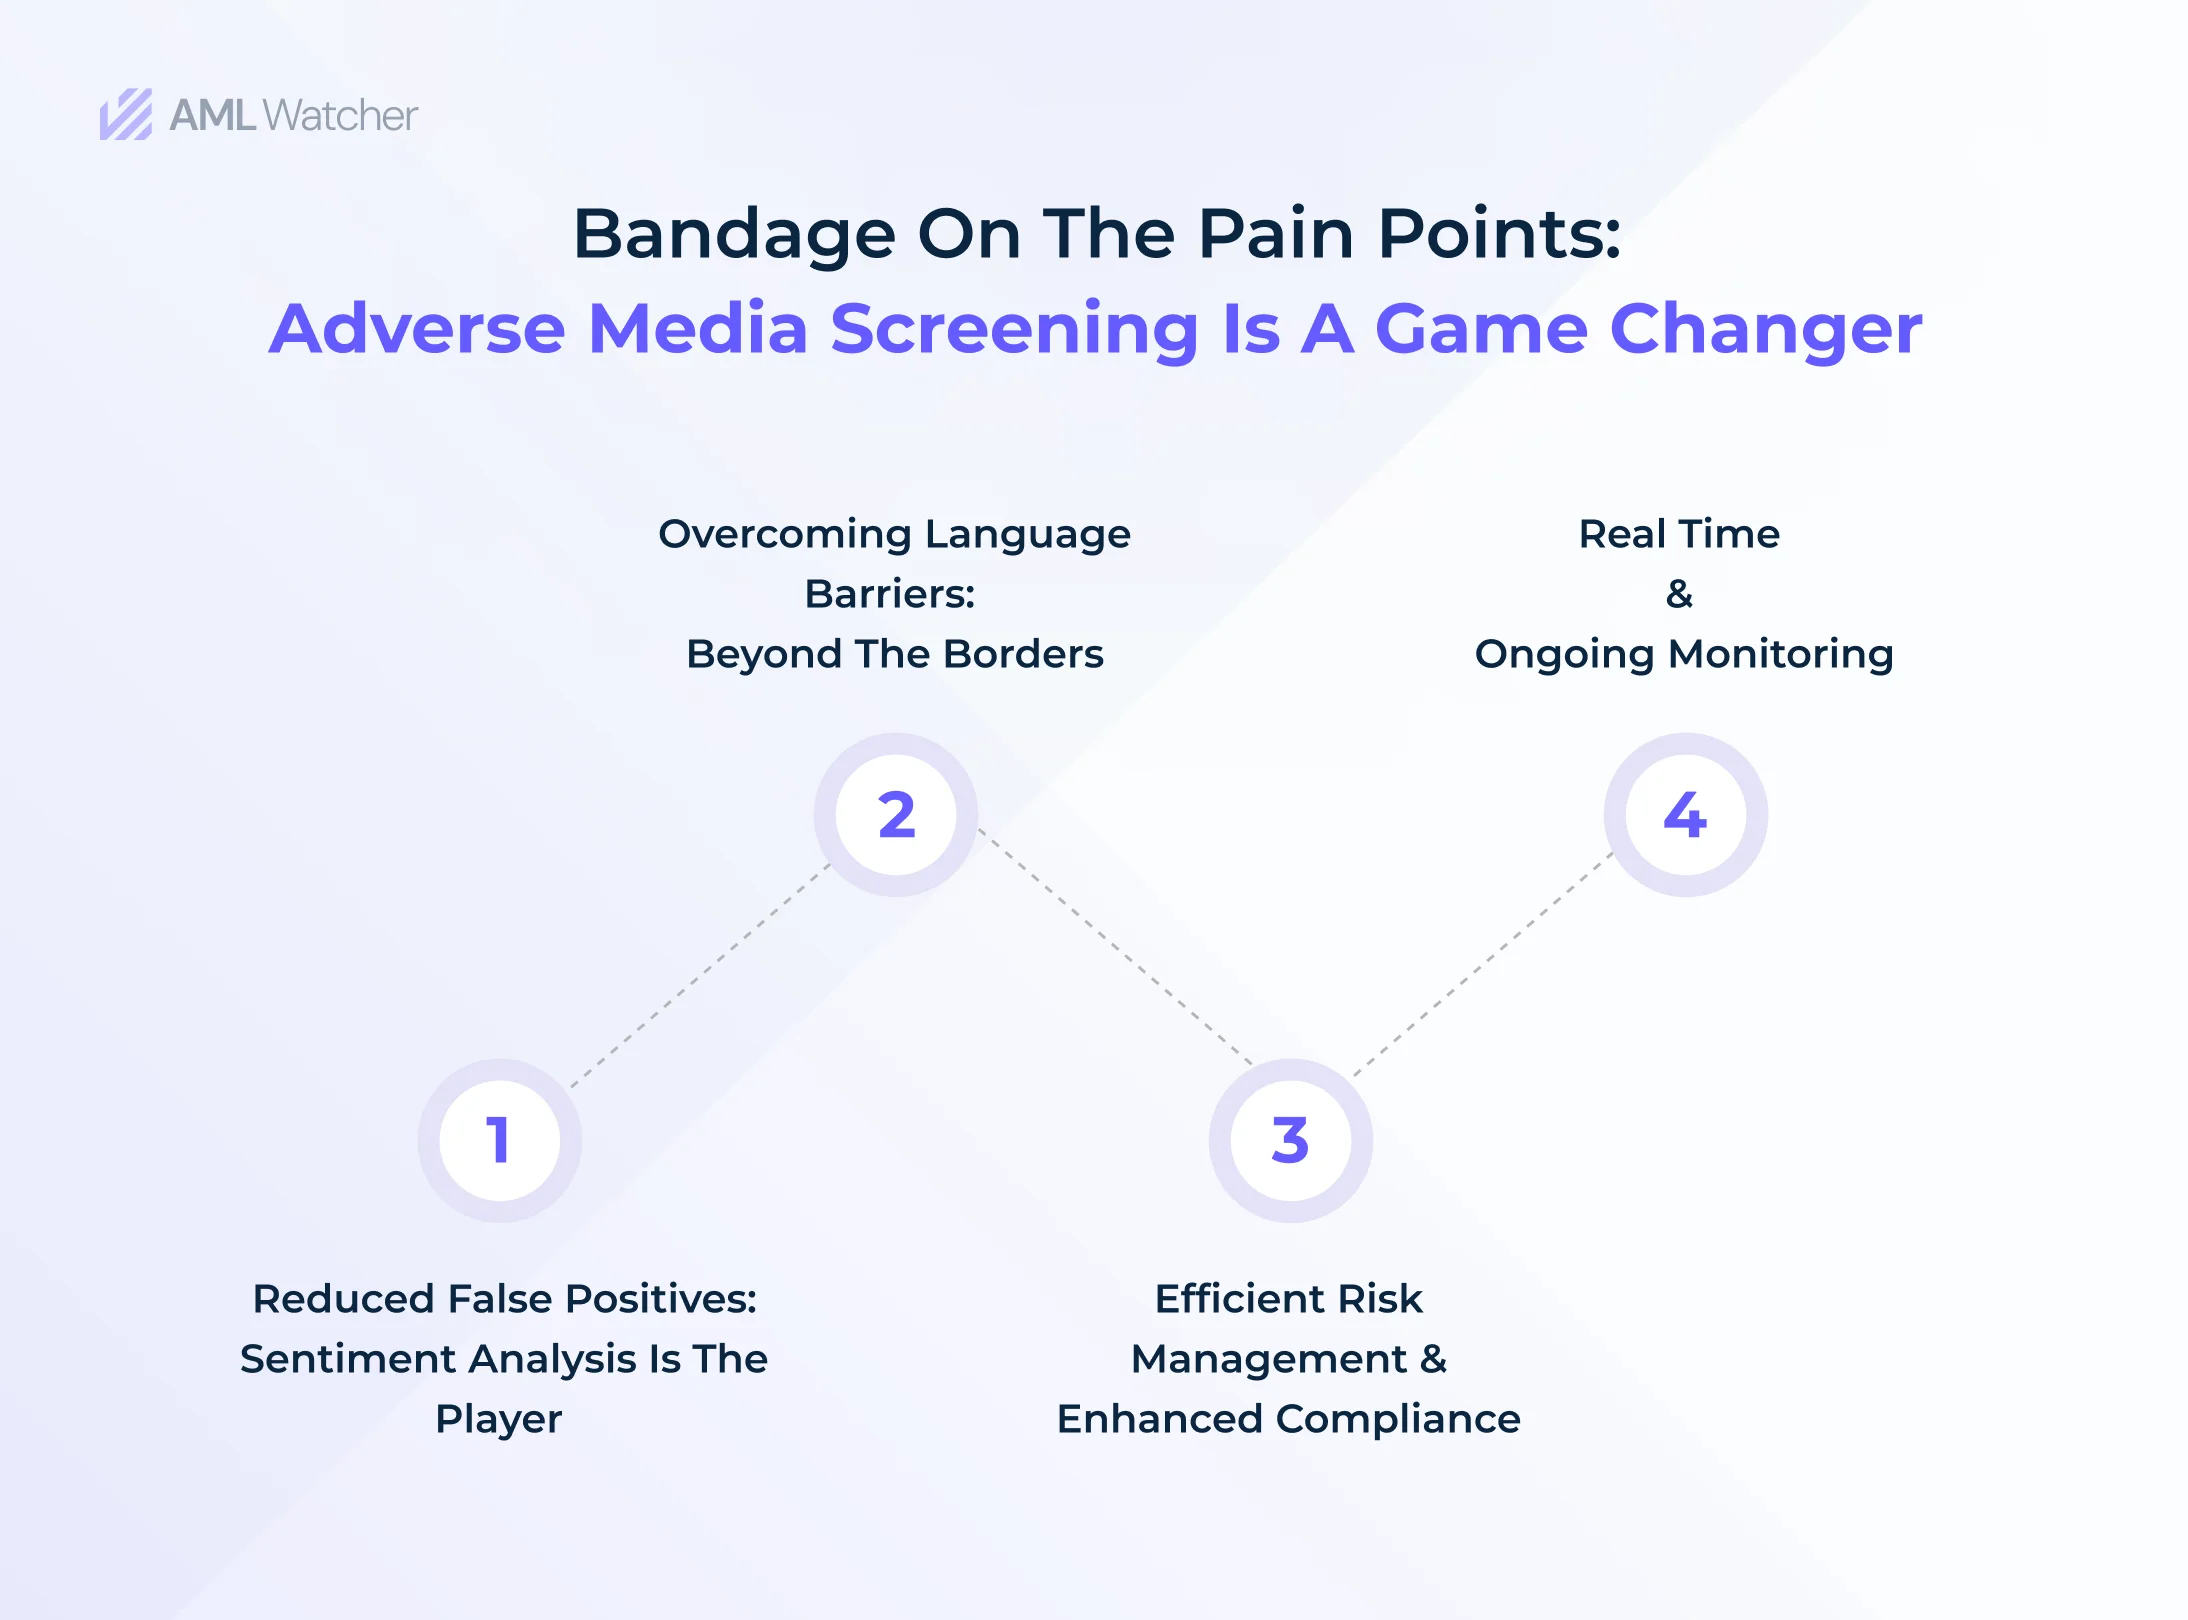 A visual representation of adverse media screening being a game changer addressing screening gaps and offering a reliable AML measure. 